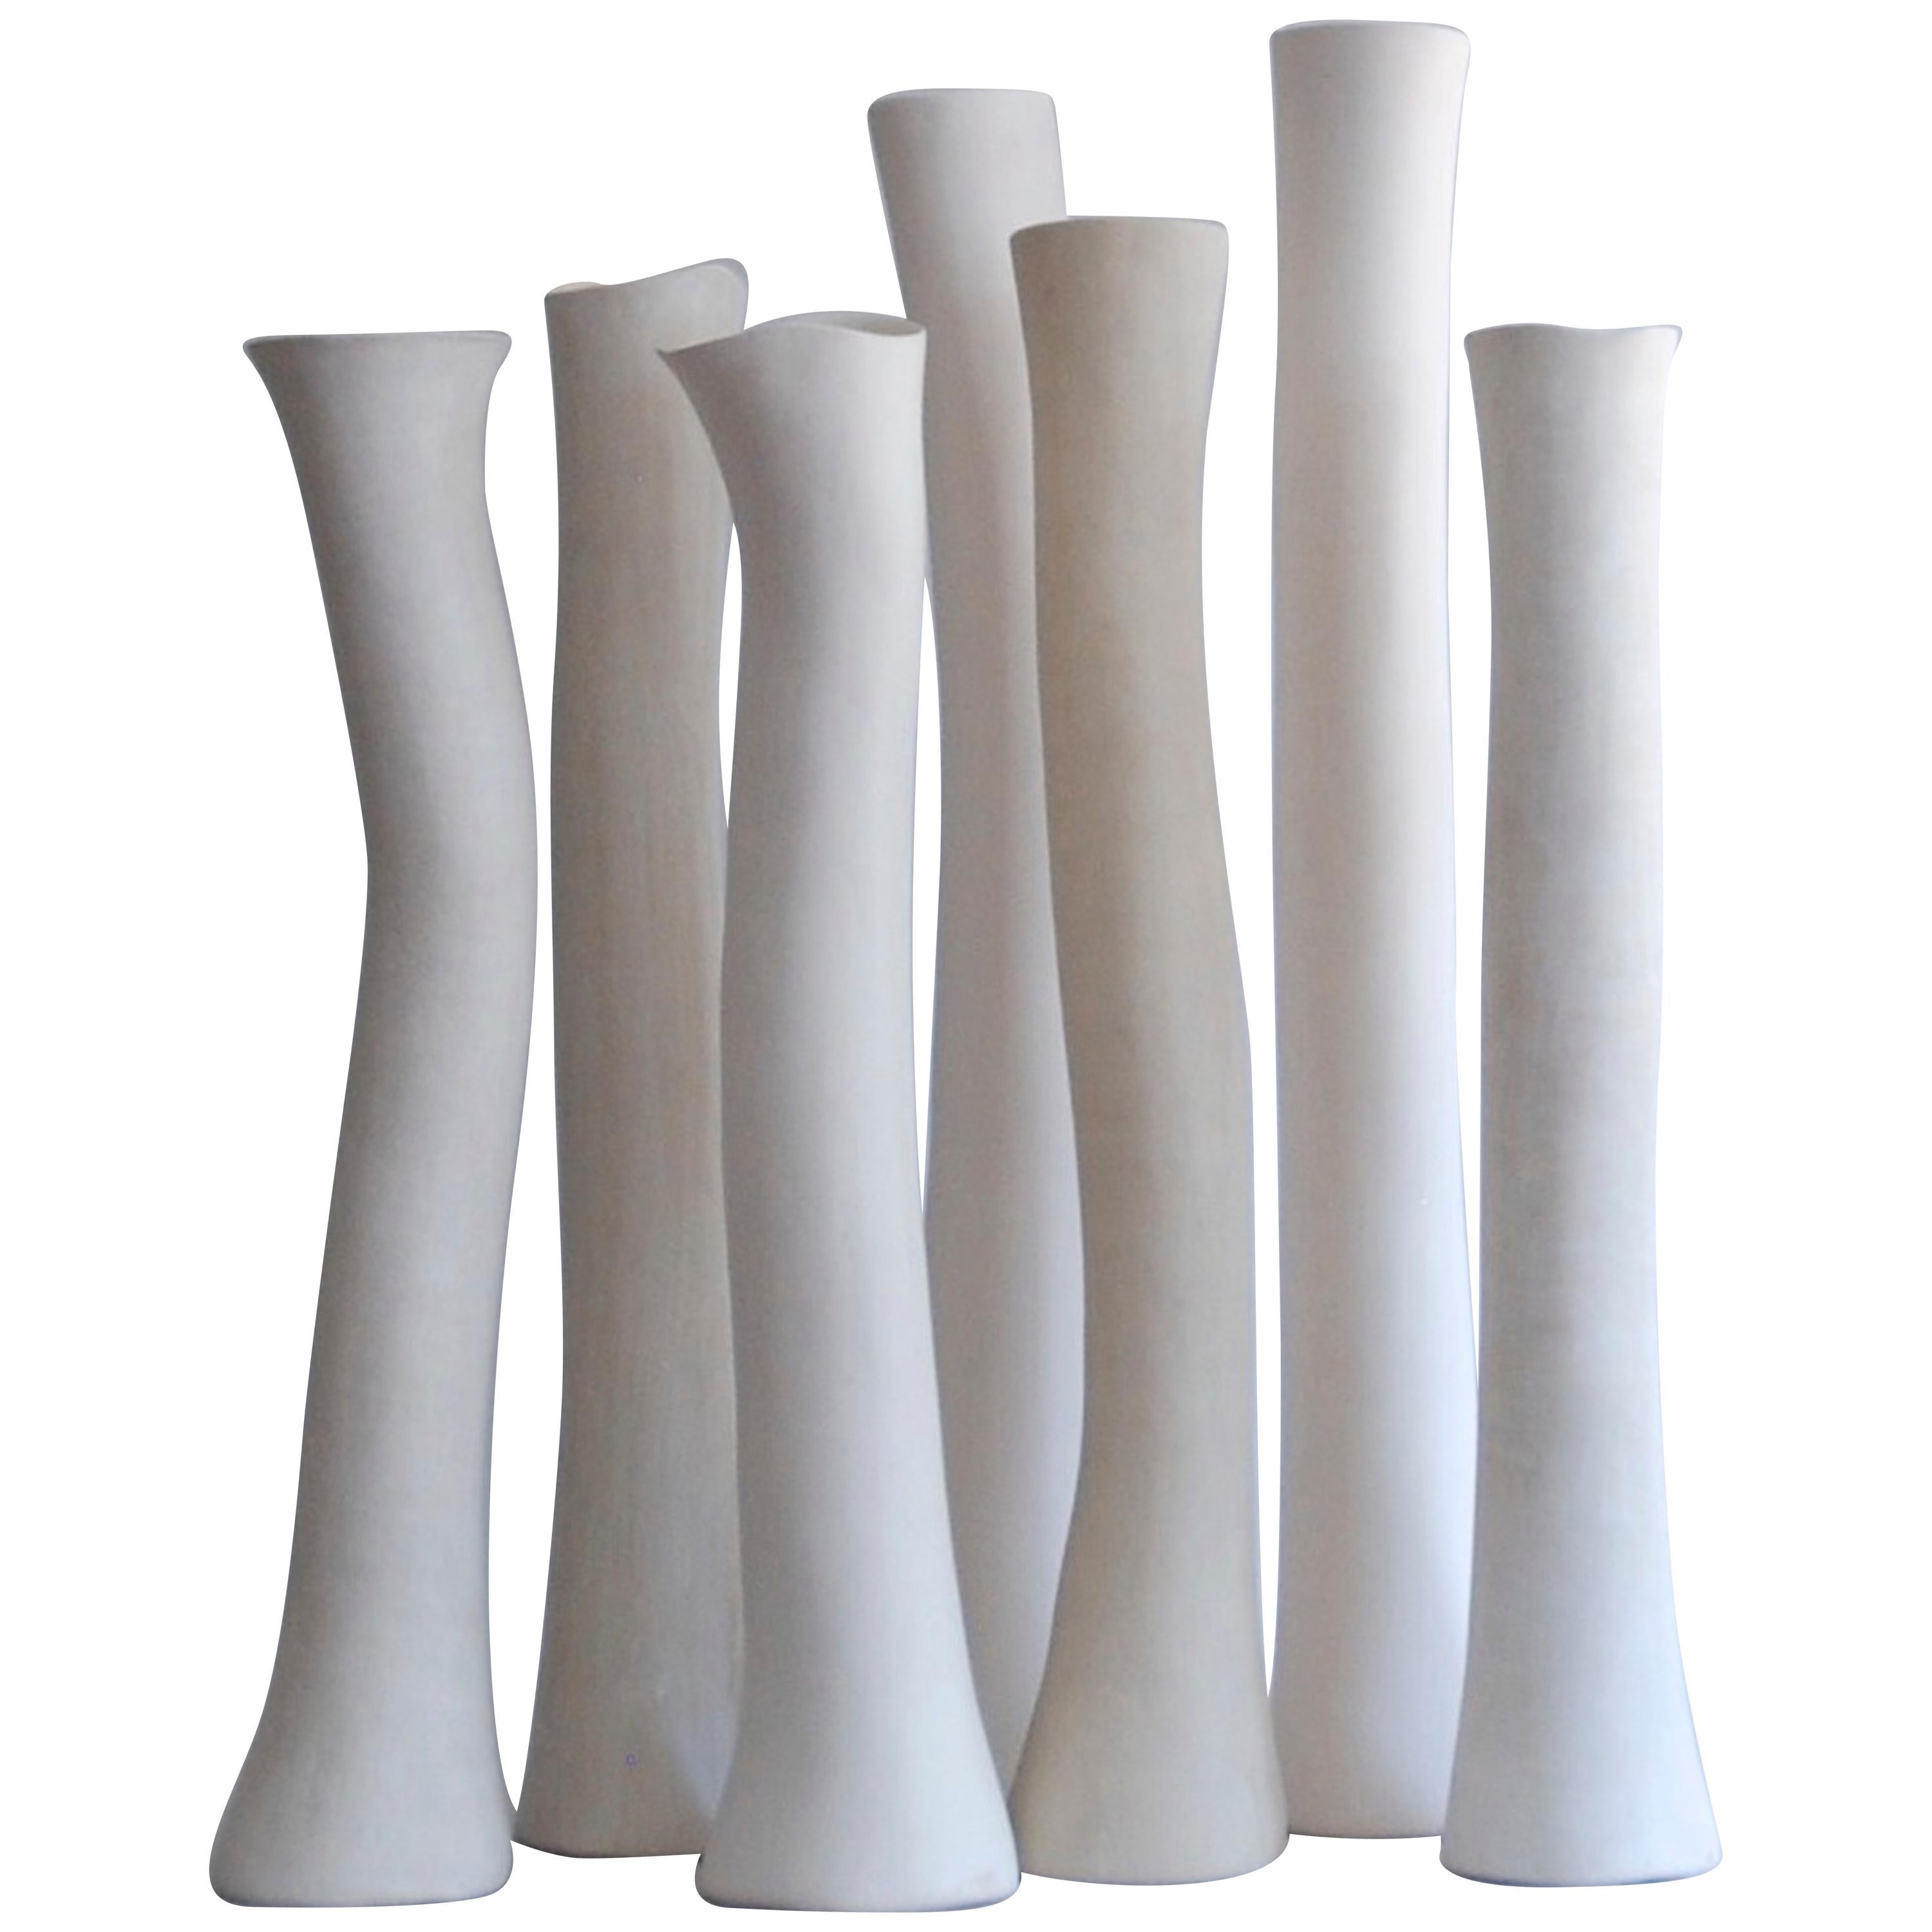 Tall Arcing Ceramic Vase, White Glaze with Brown Edge, Hand Built 6